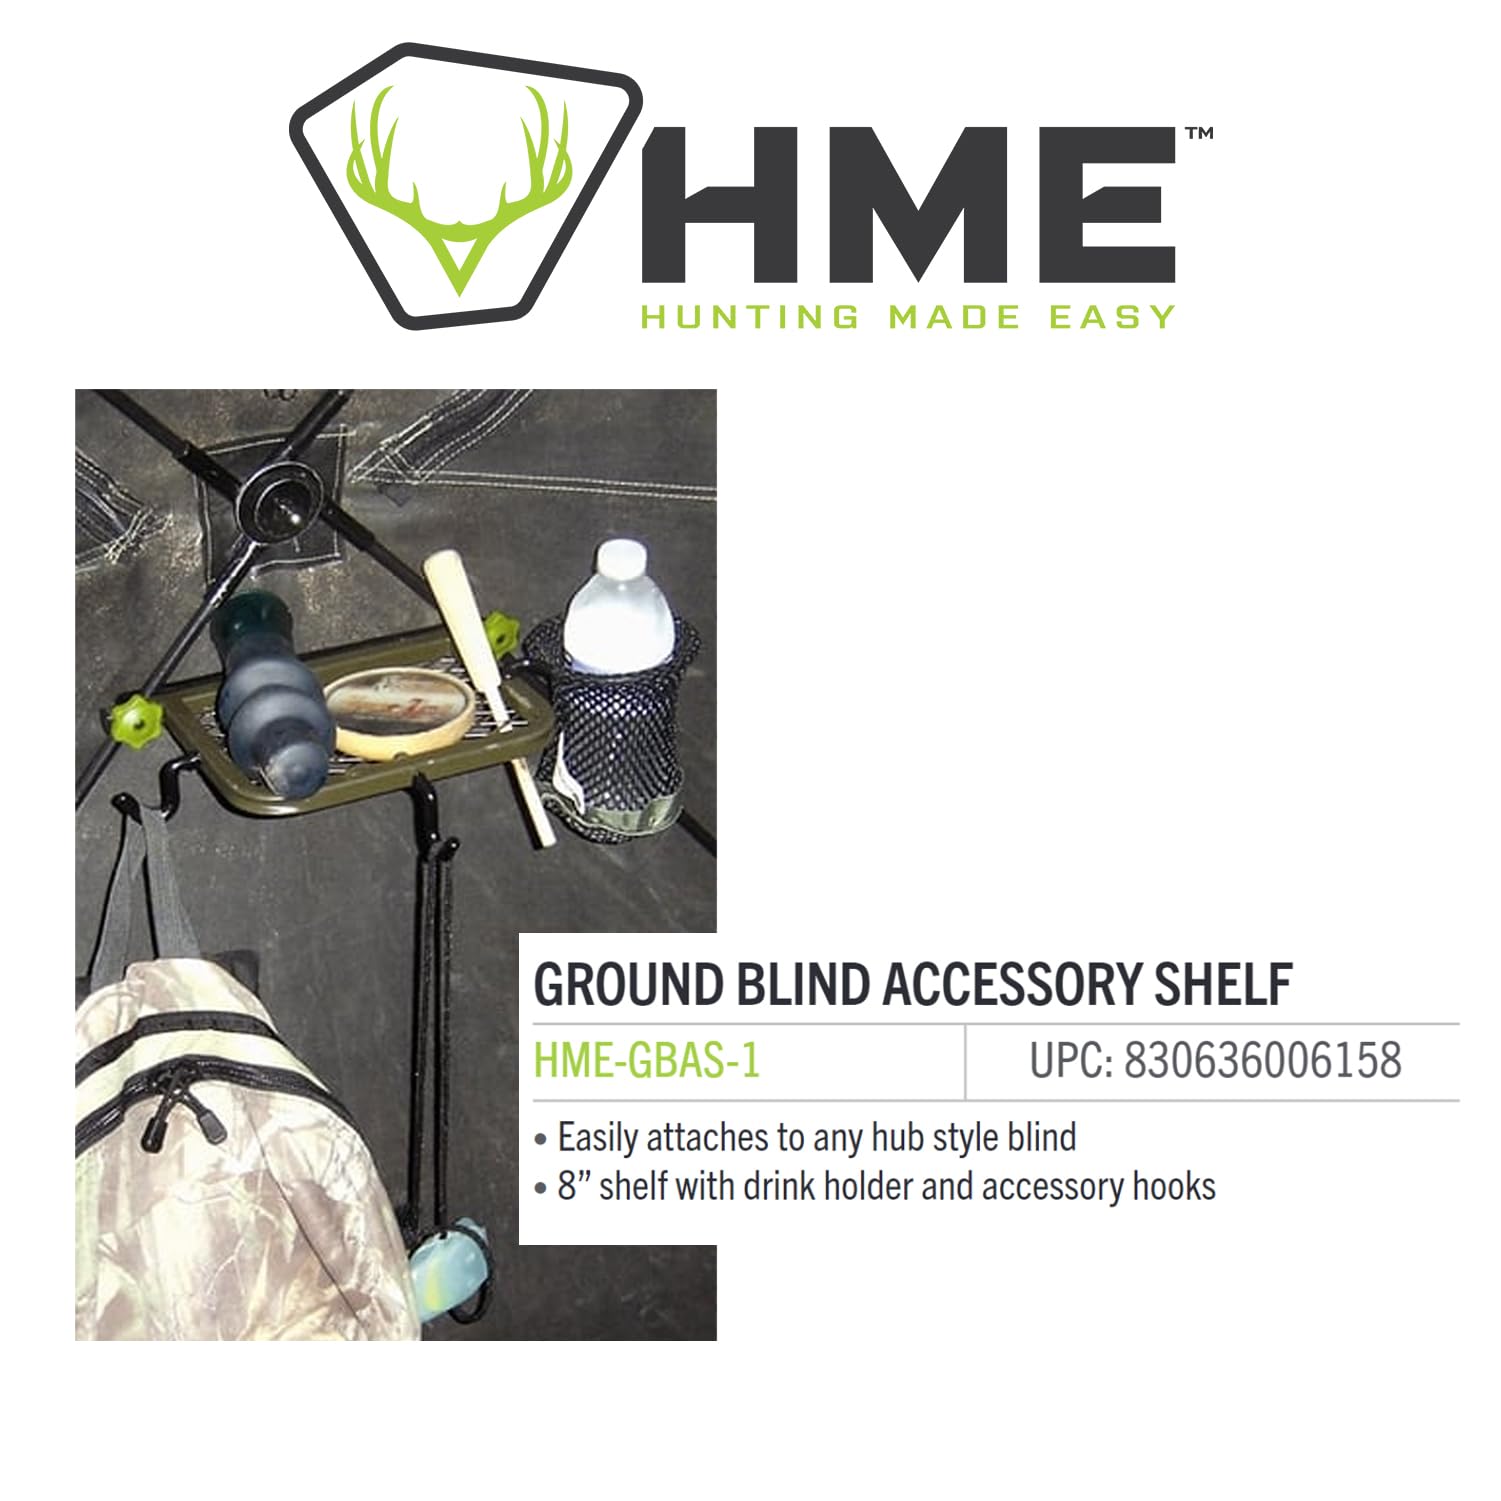 HME Durable Convenient Easy-to-Attach Hunting Ground Blind Accessory Shelf (8 Inches) with Drink Holder & Accessory Hooks